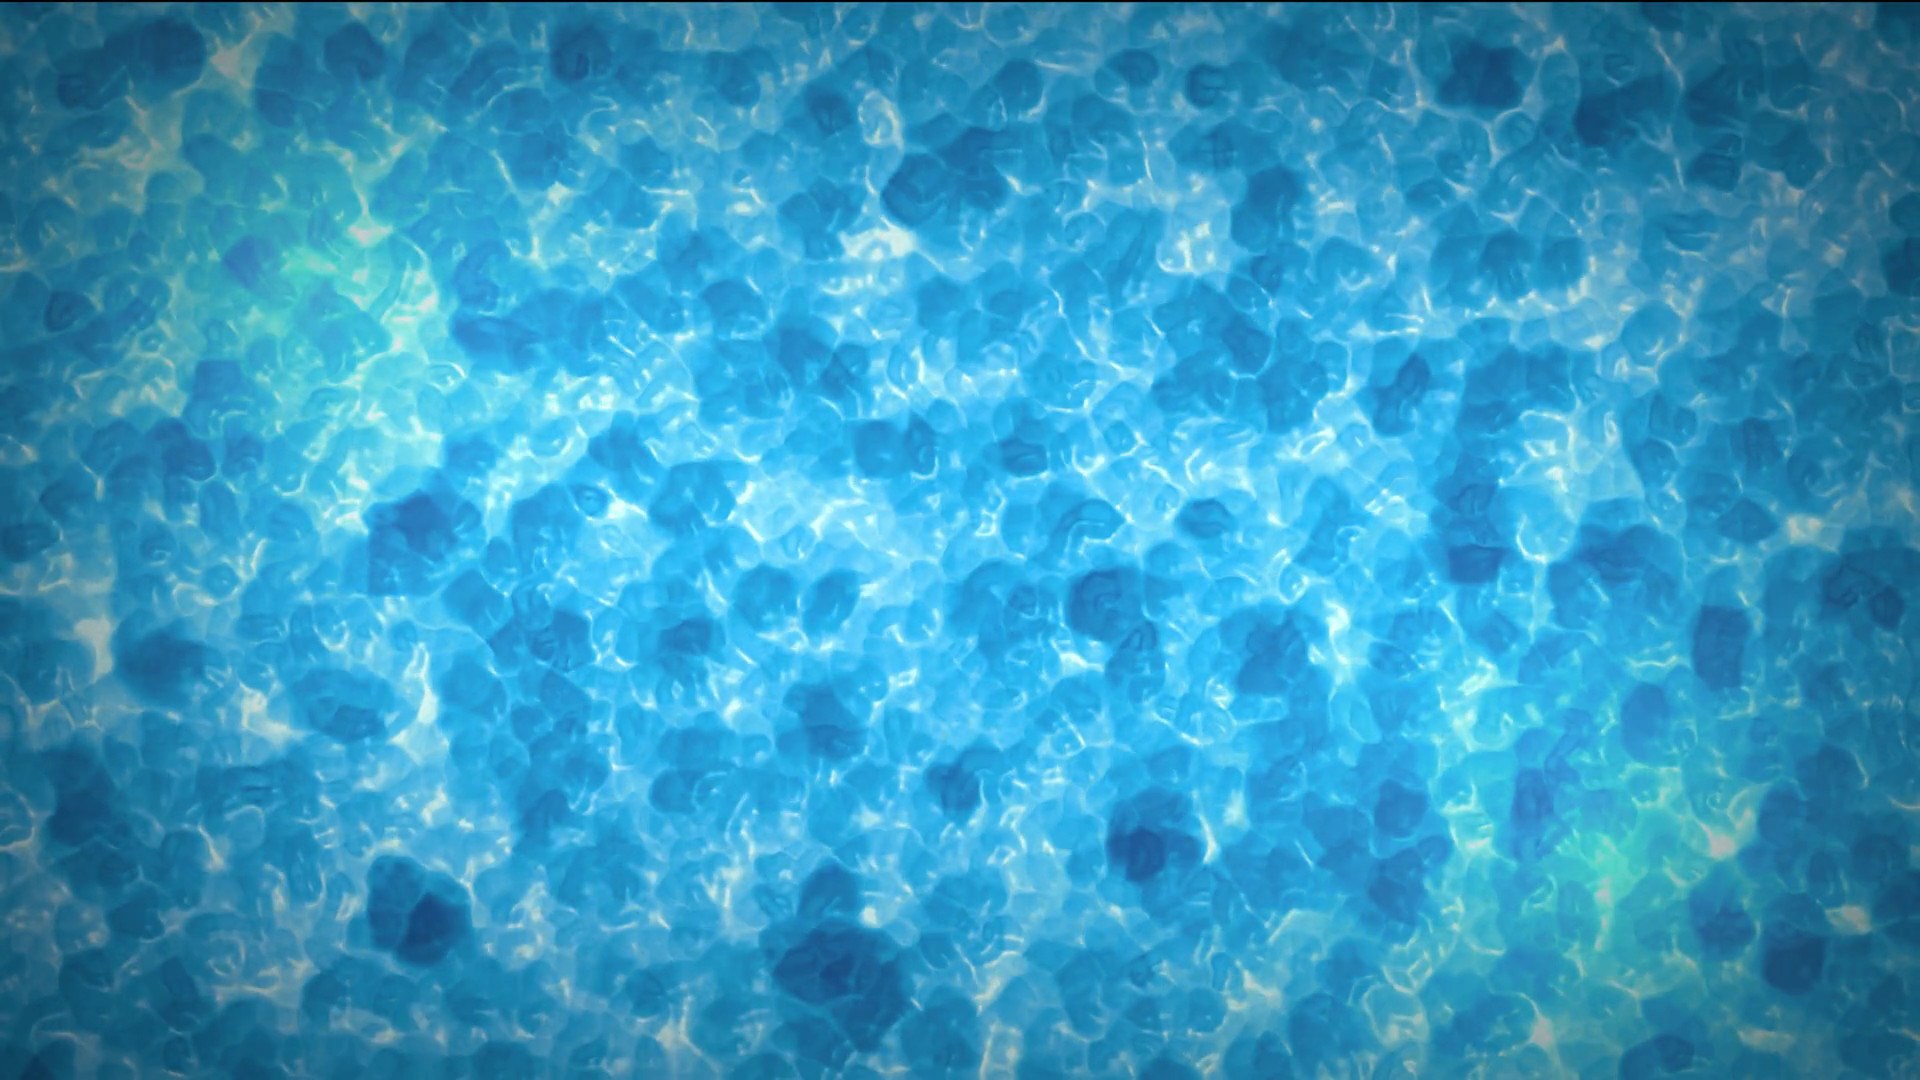 1920x1080  Seamless abstract blue surface liquid water with blurry bubble  element particle water background texture pattern. In sea water concept in  4k ultra ...